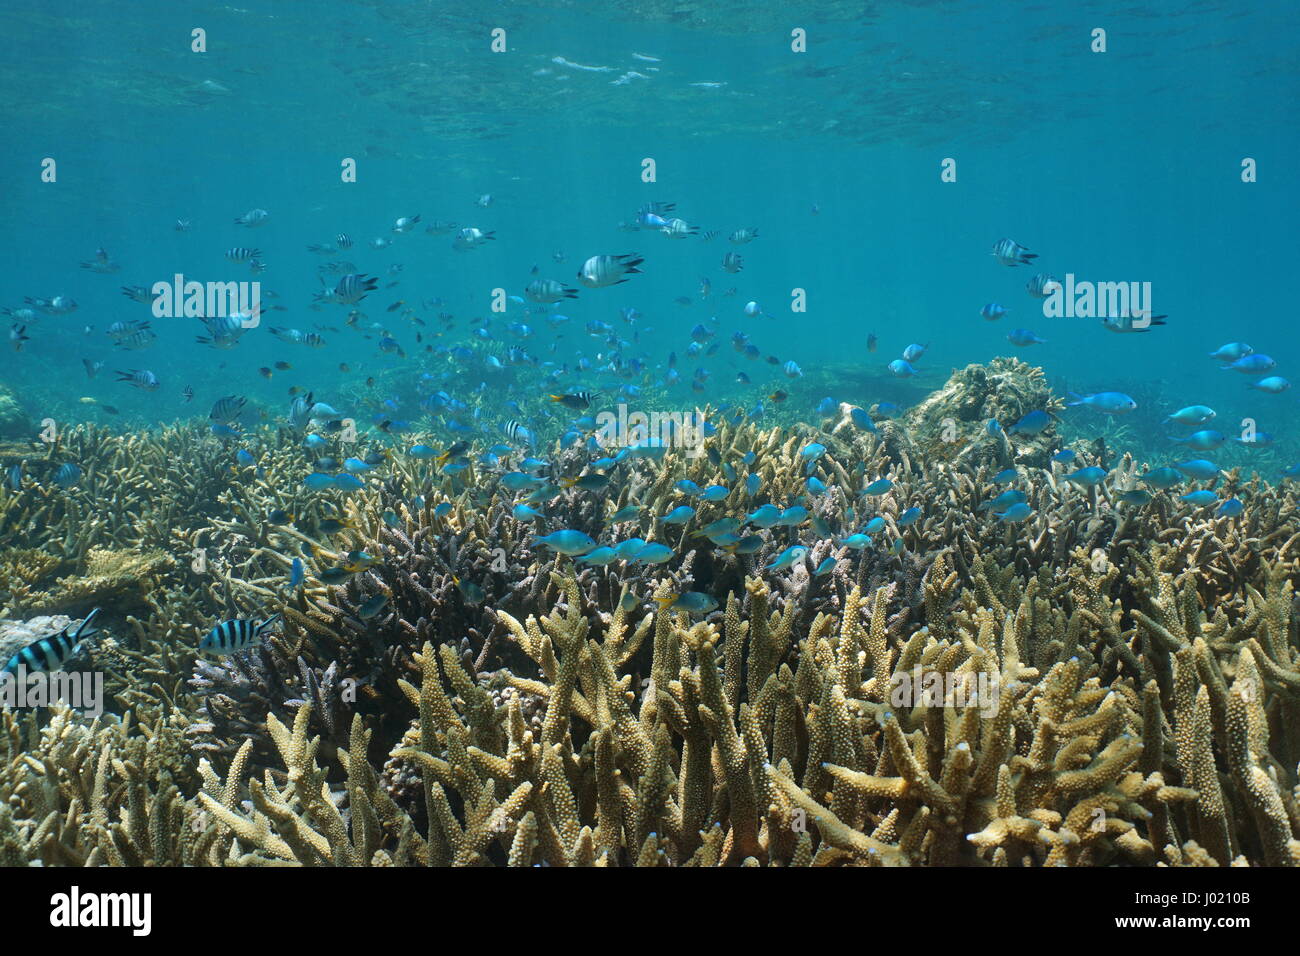 Underwater coral reef with fish shoal of various species of damselfish over staghorn corals, south Pacific ocean, New Caledonia Stock Photo